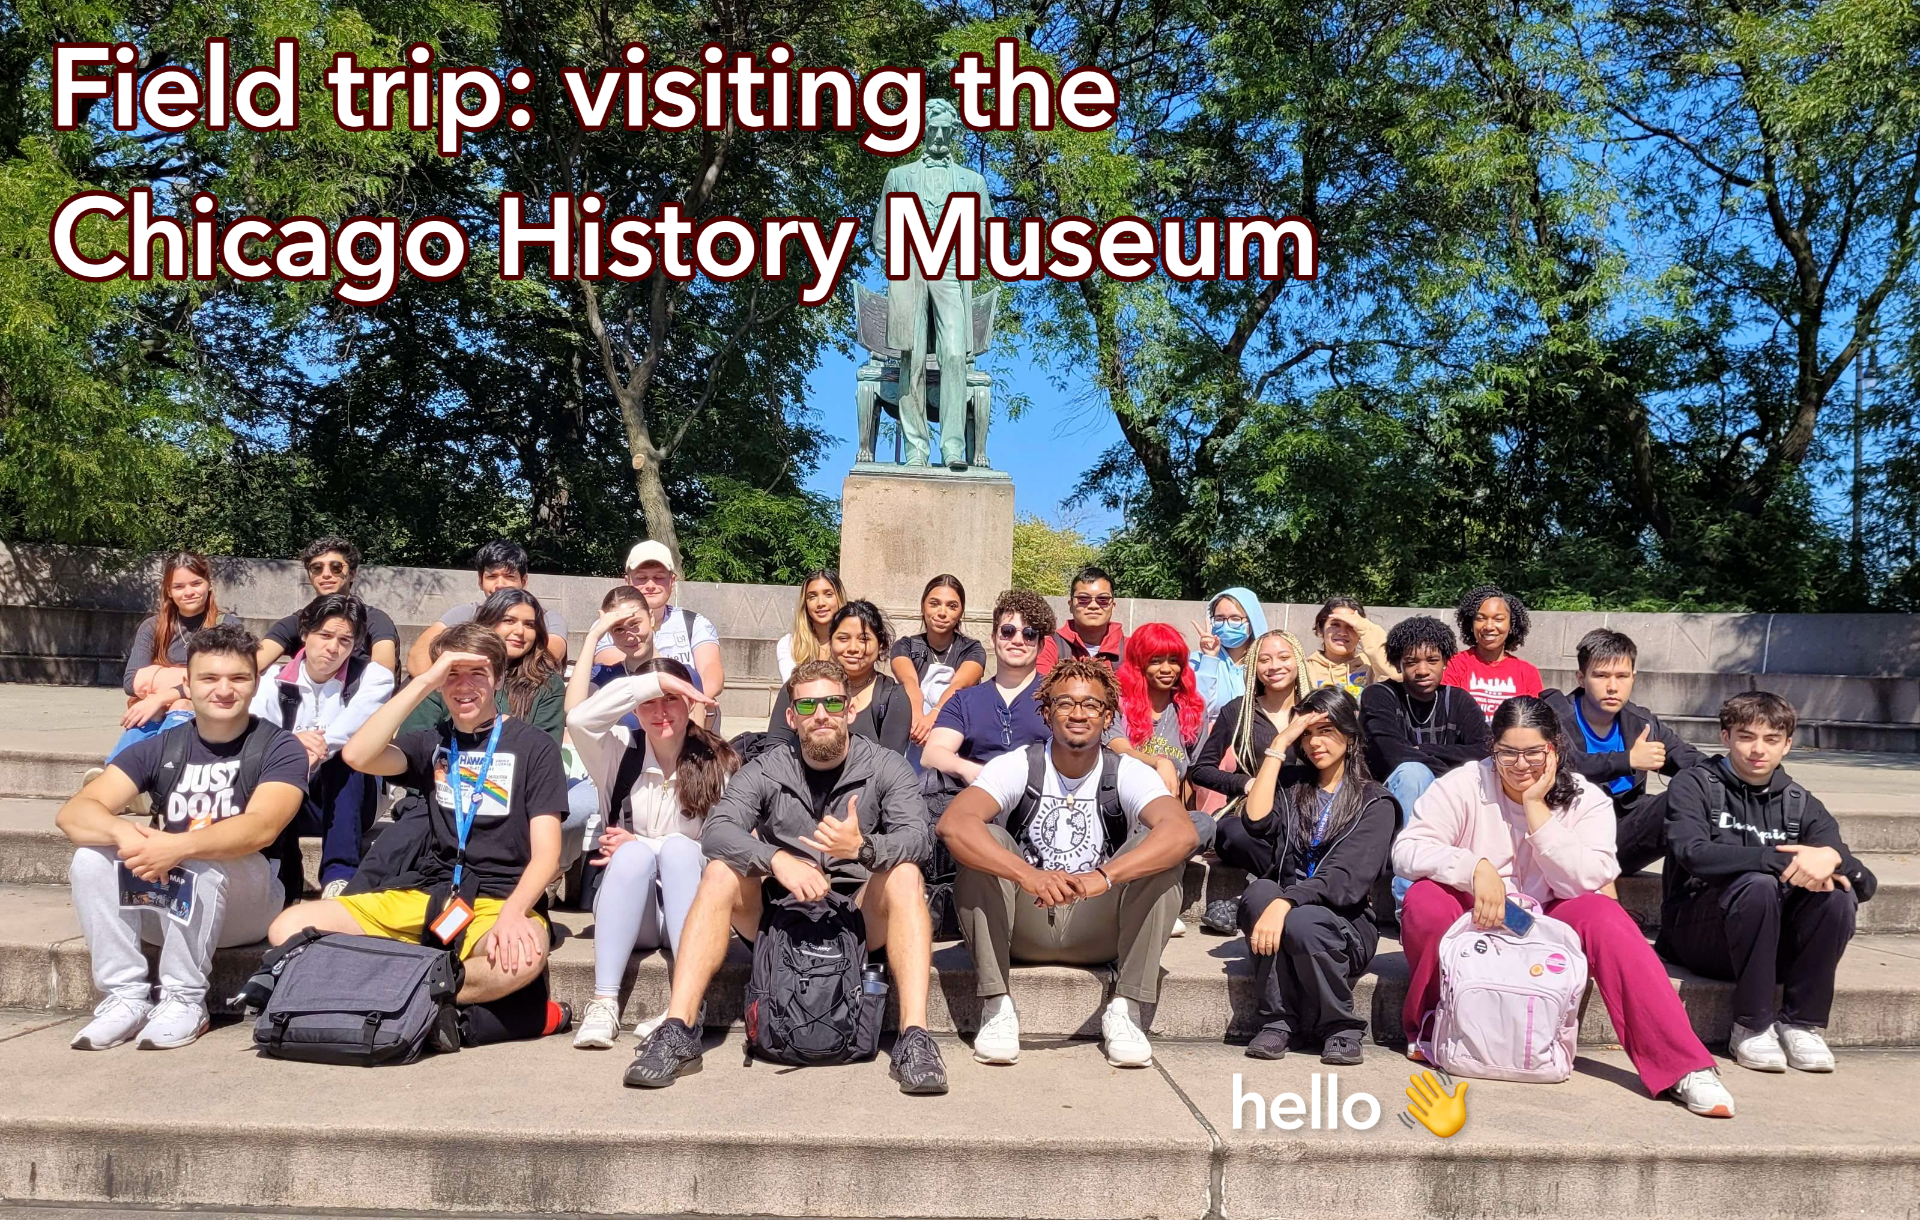 An image of a college class with the caption “Field trip: visiting the Chicago History Museum”